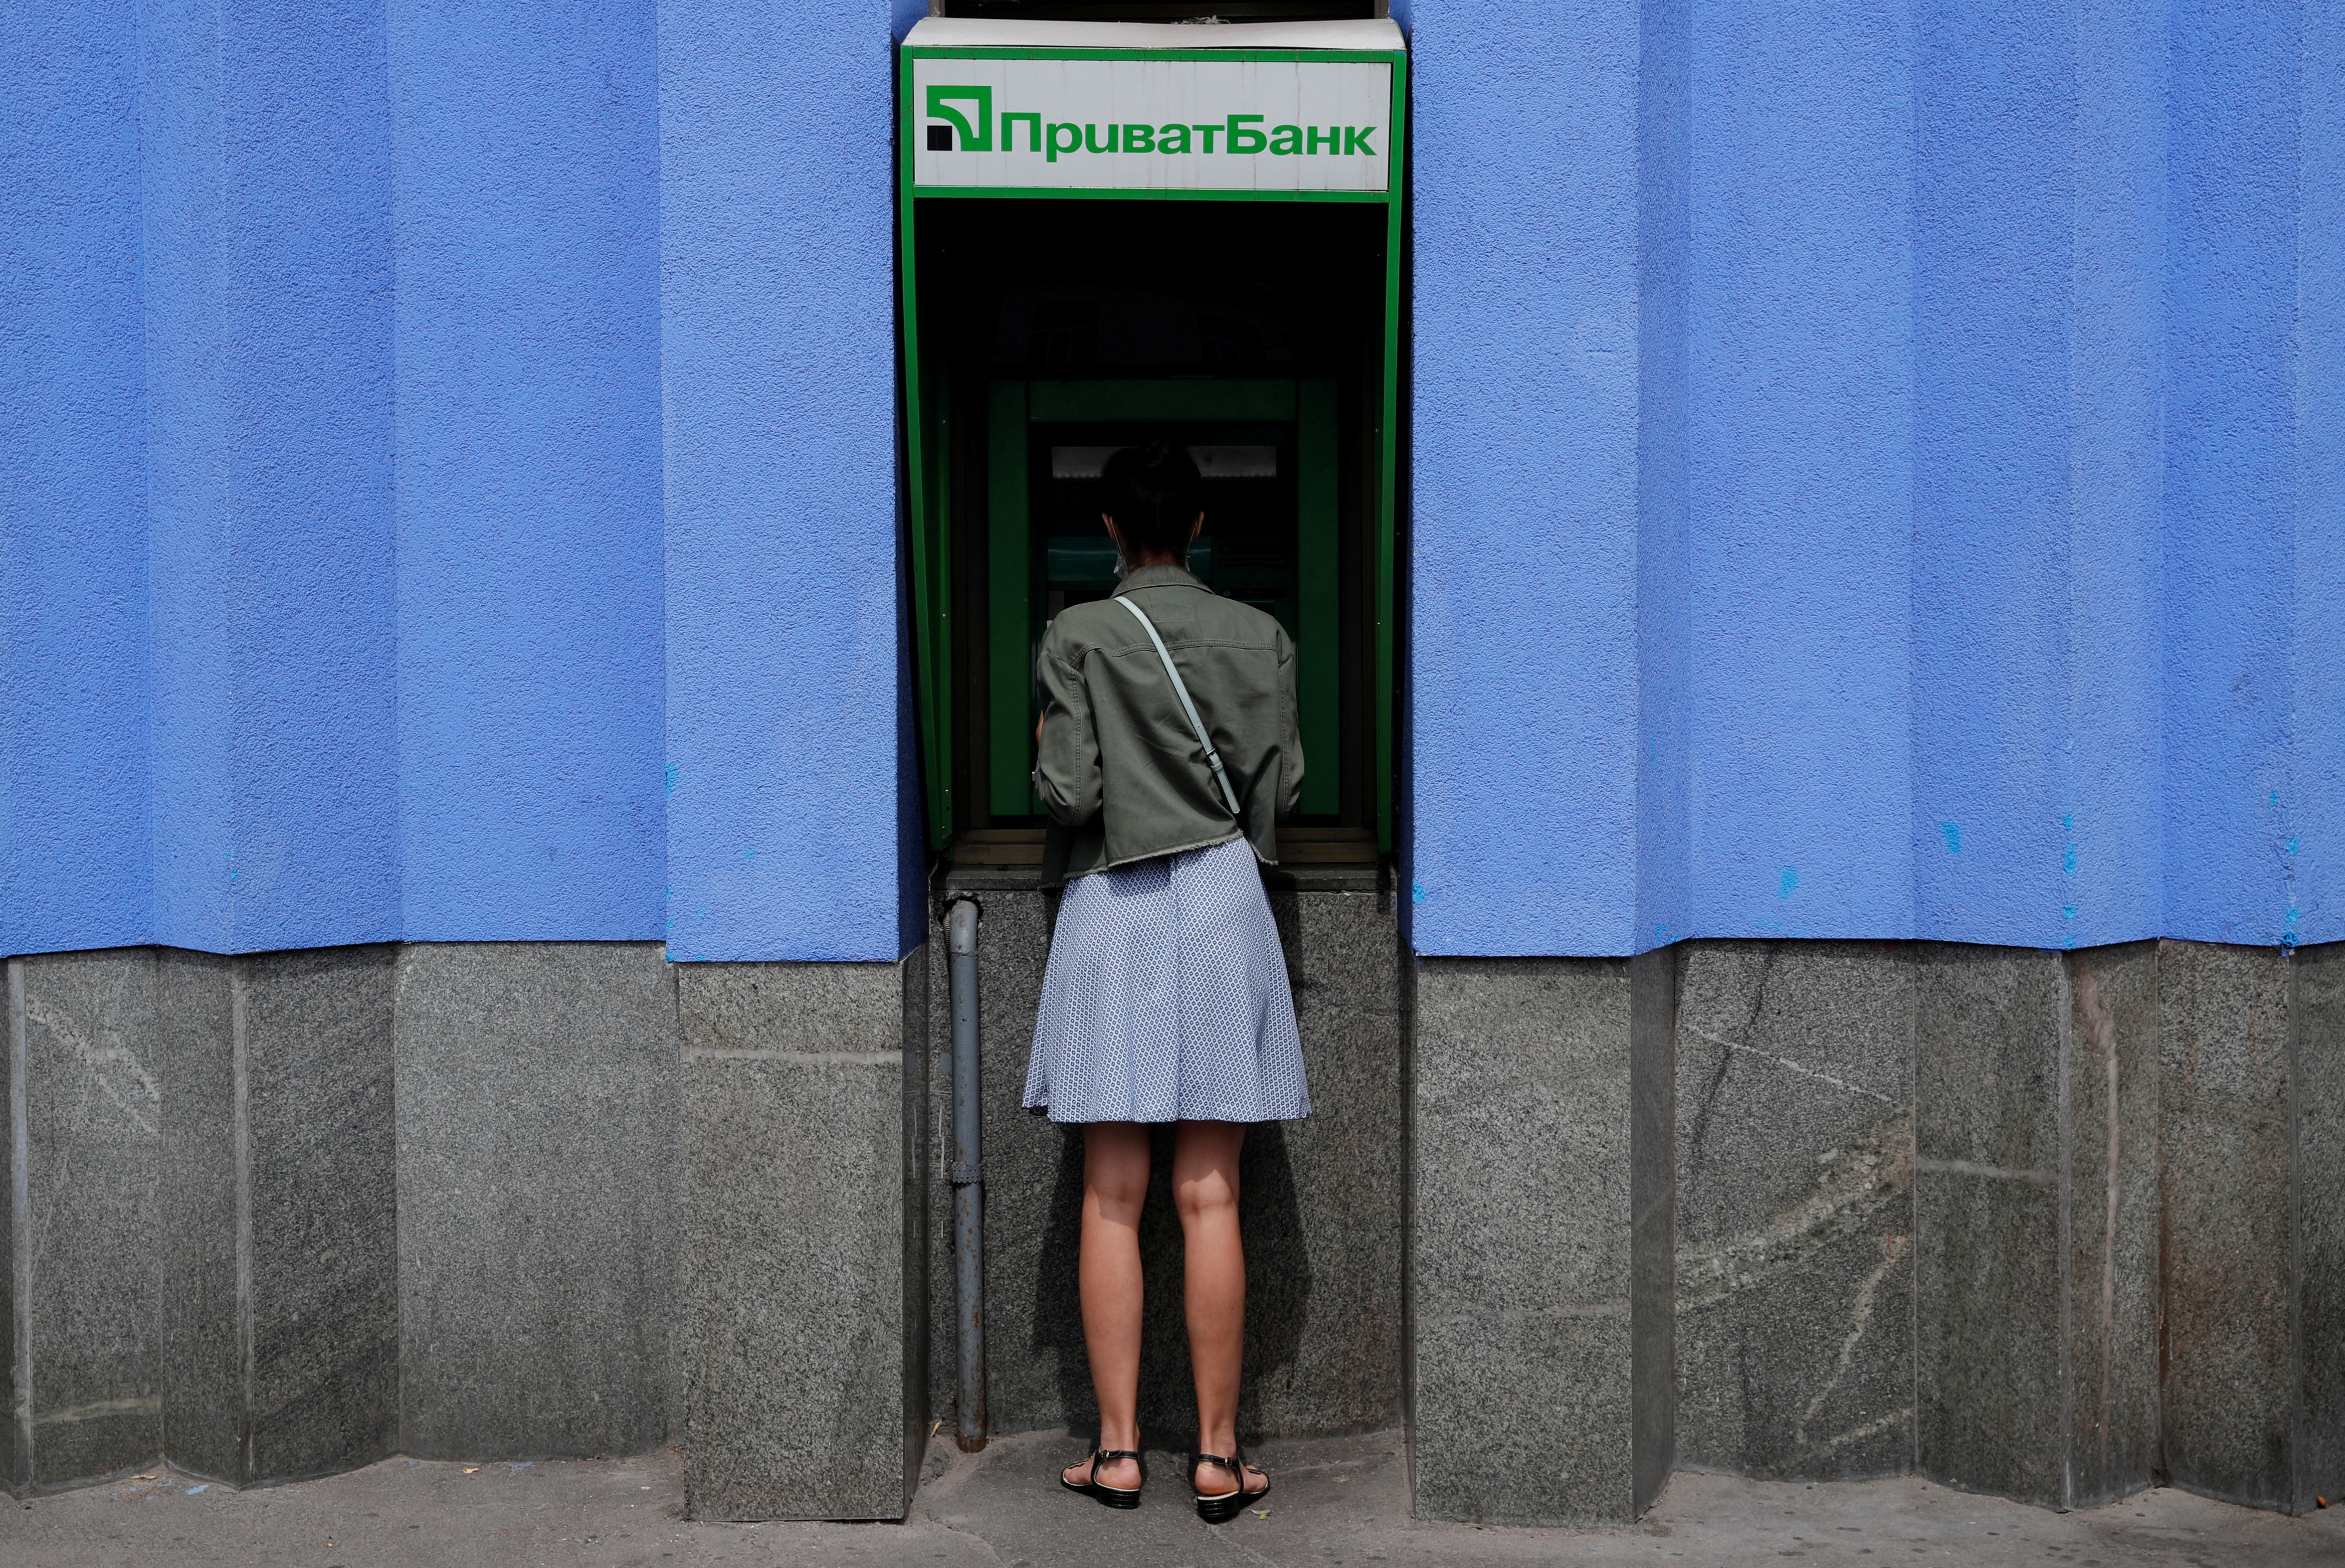 A woman uses a PrivatBank ATM machine in Kyiv